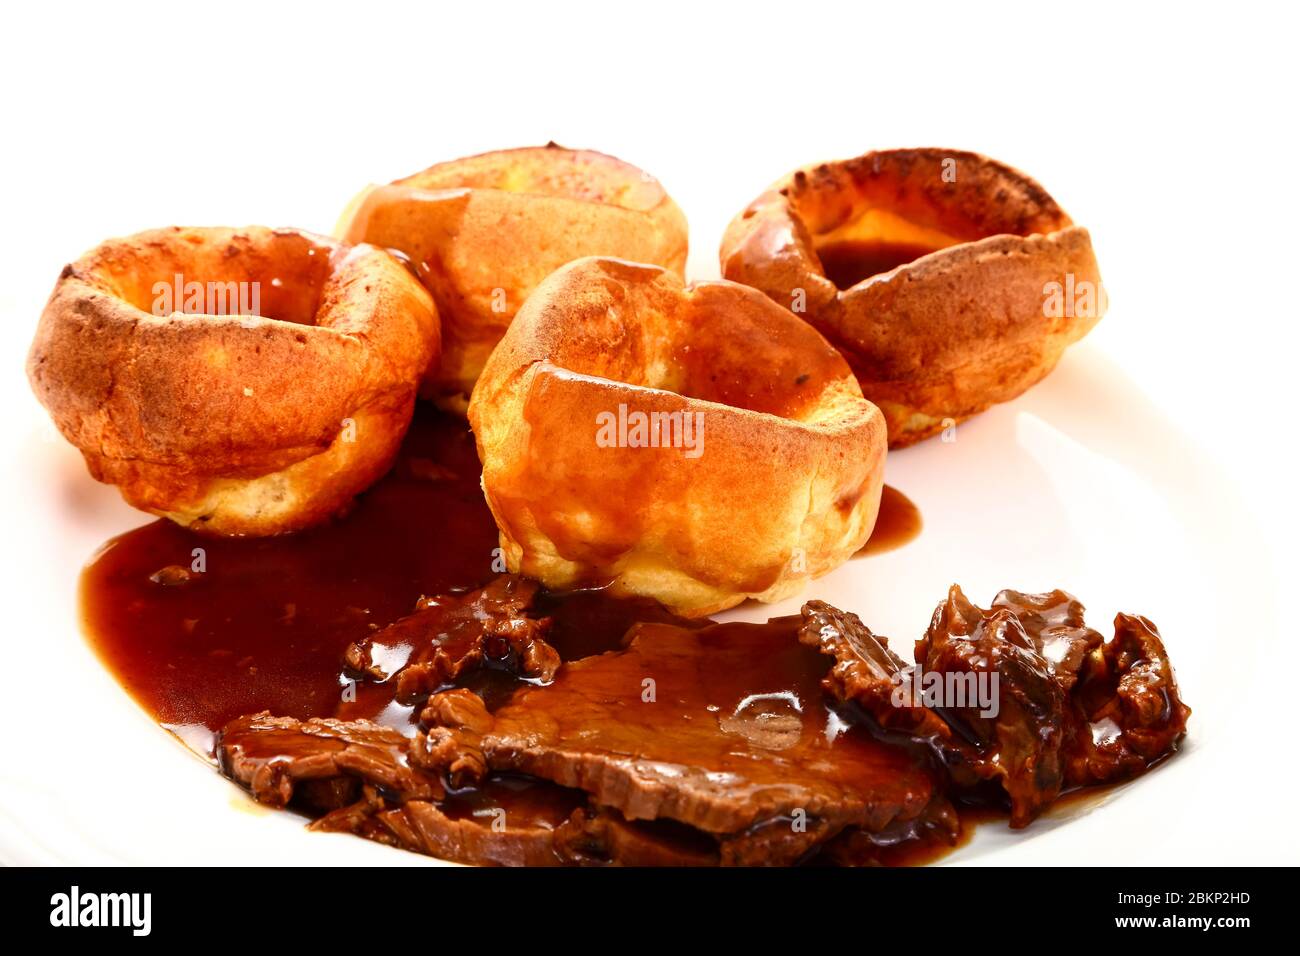 Traditional british meal of roast beef and yorkshire puddings with gravy on a white plate Stock Photo